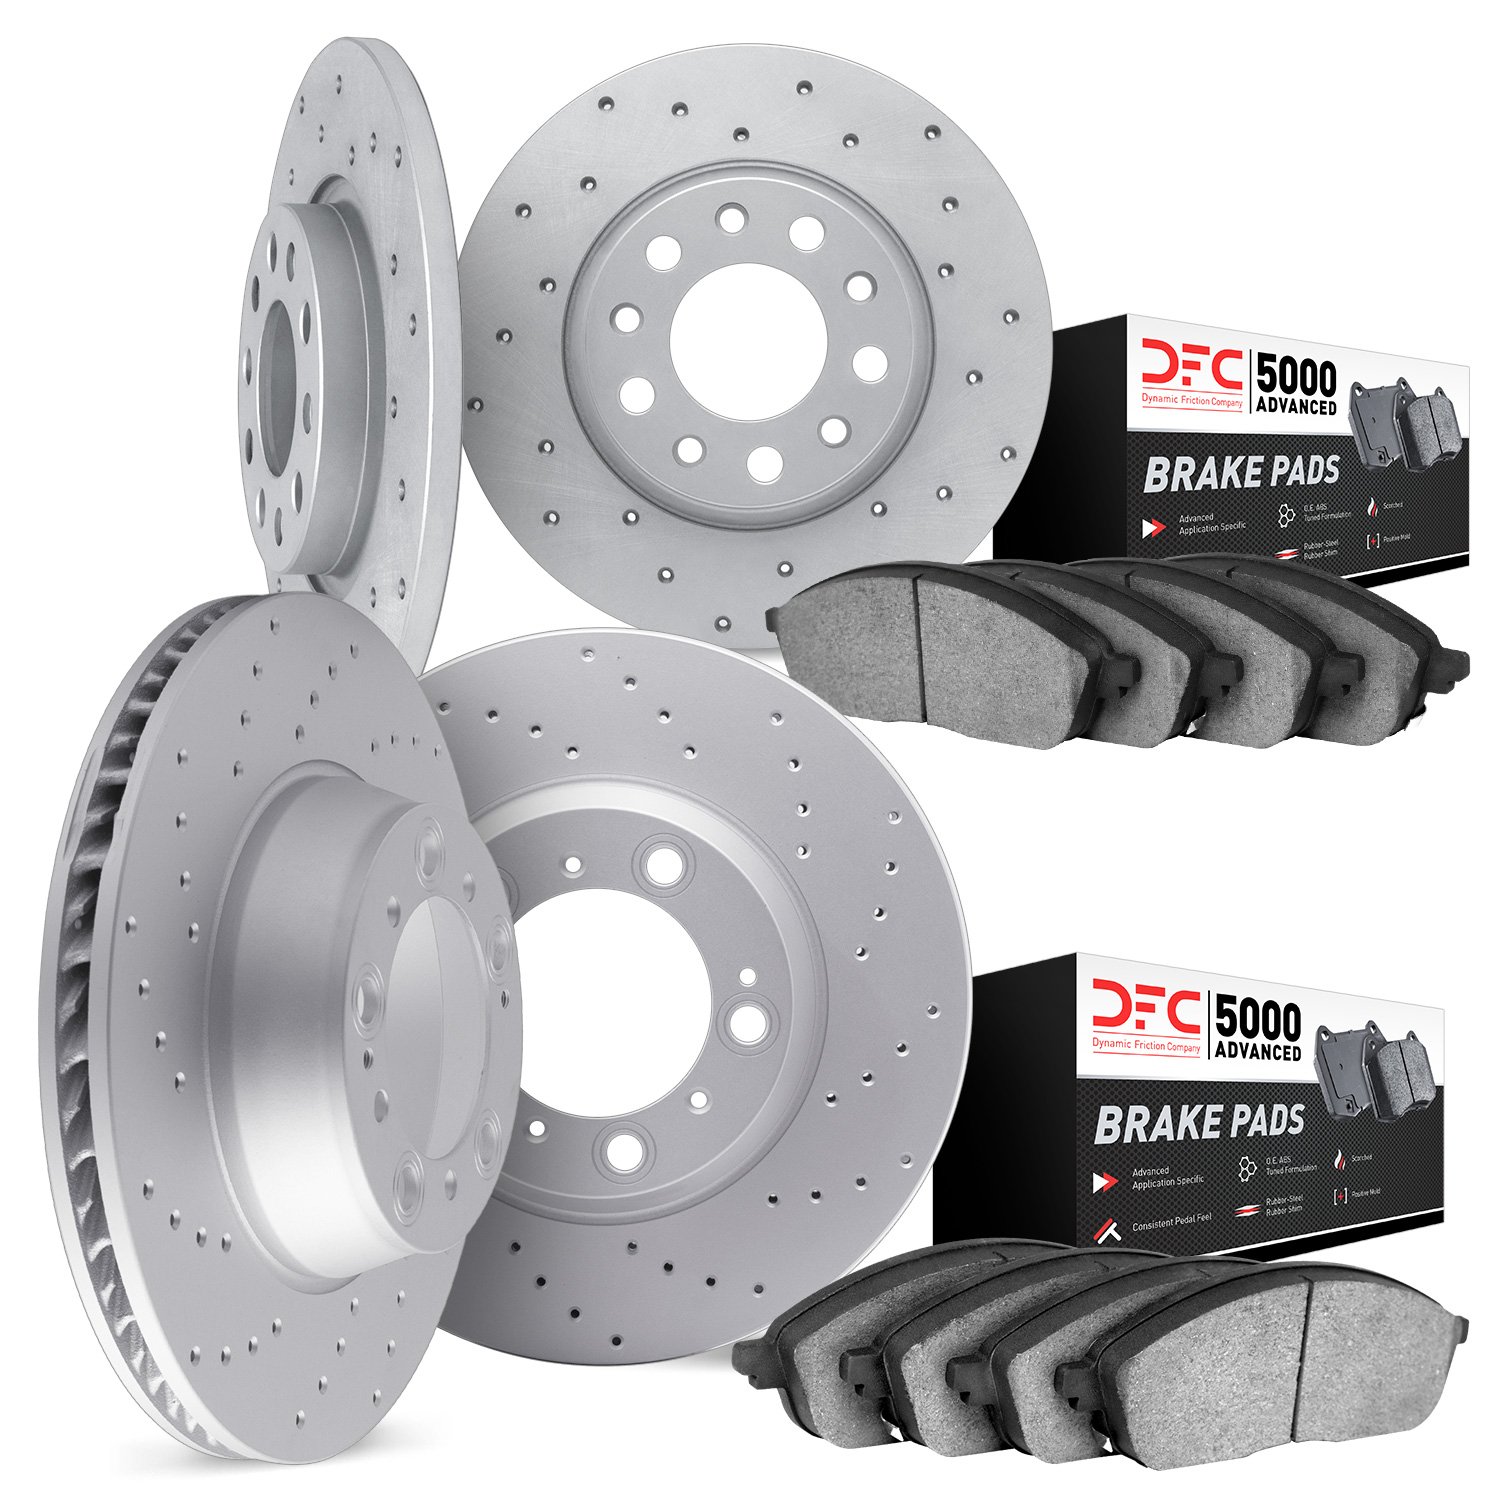 2704-13078 Geoperformance Drilled Brake Rotors with Active Performance Pads Kit, 2015-2021 Subaru, Position: Front and Rear